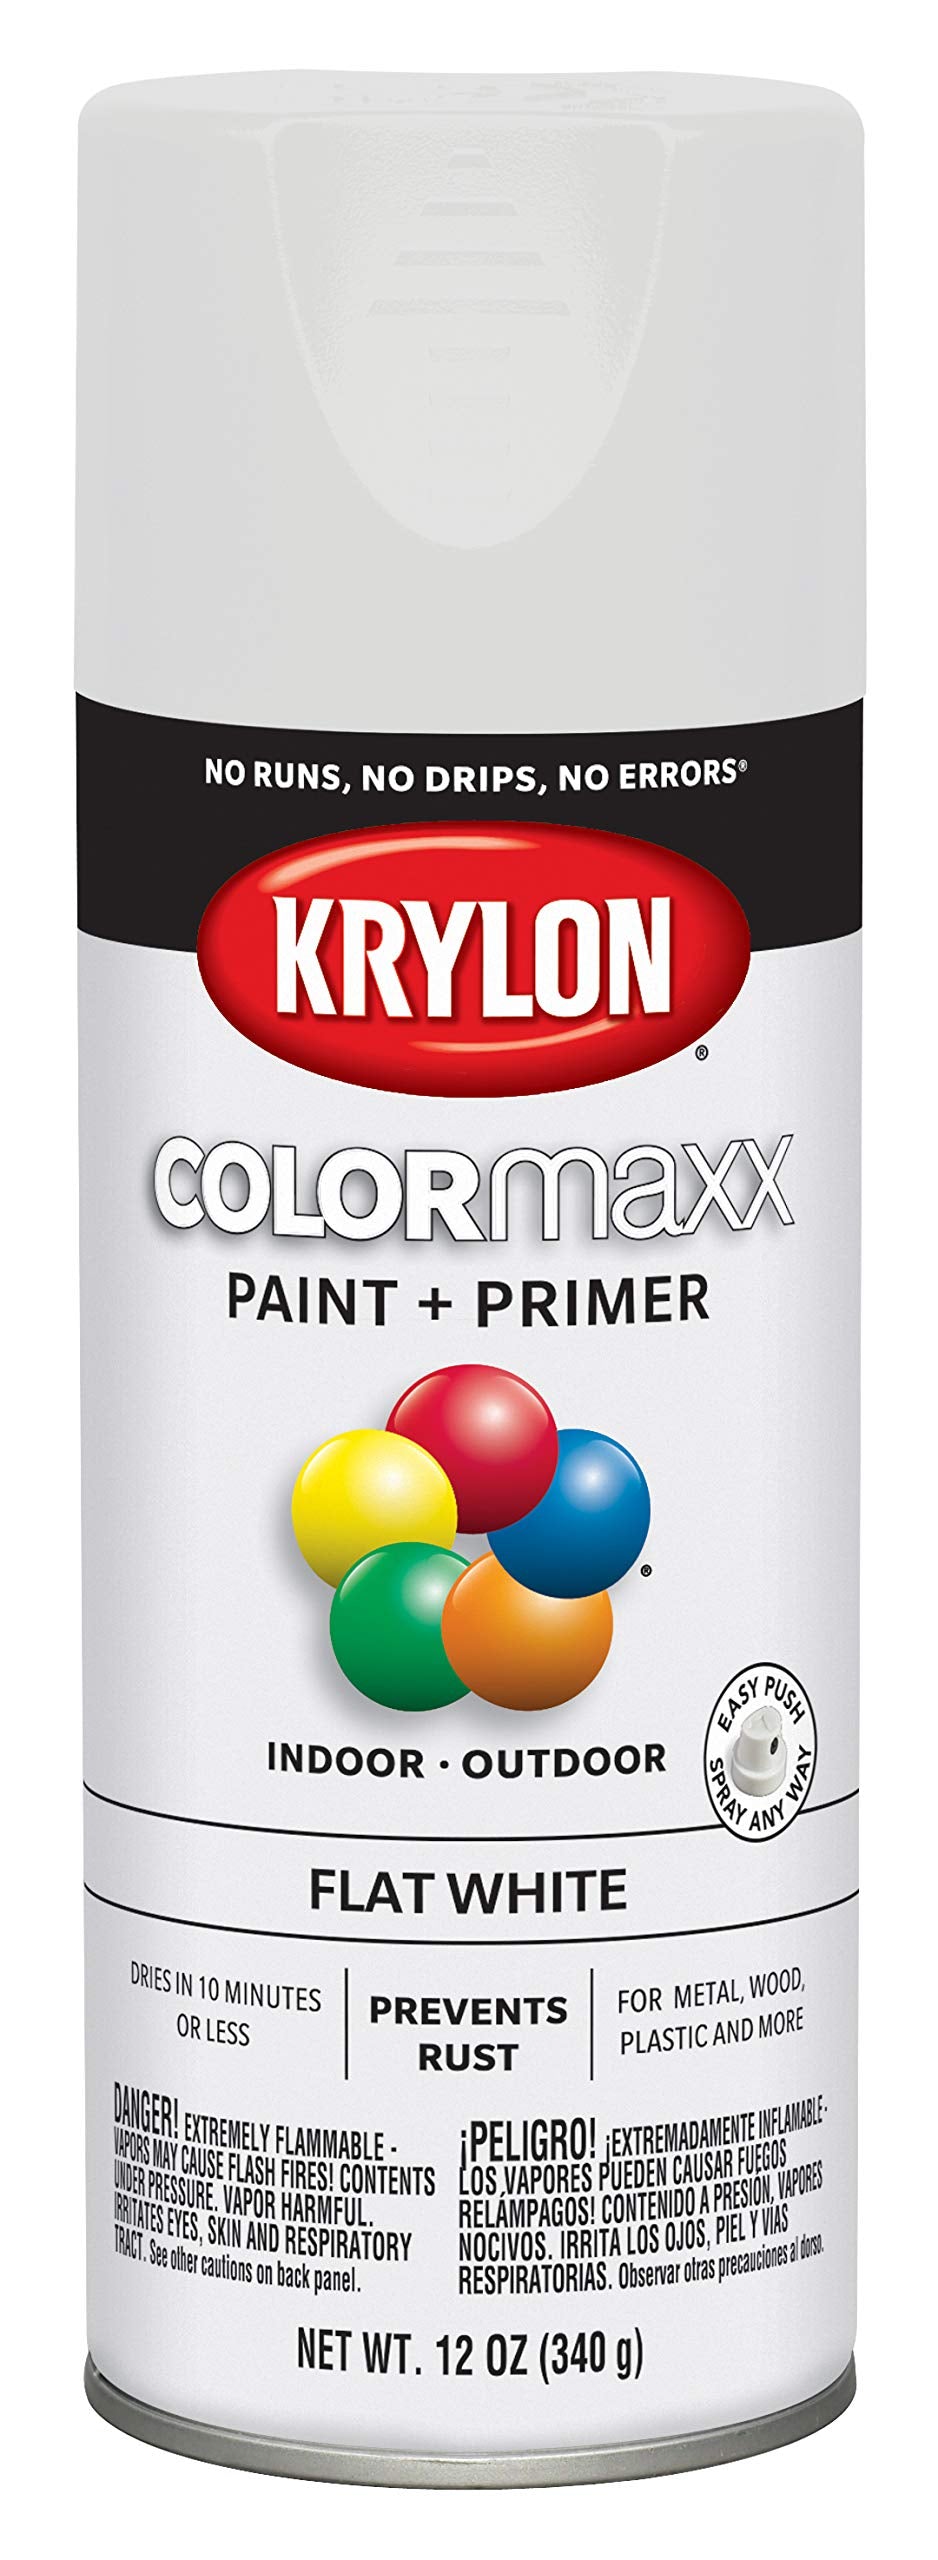 Krylon K05548007 COLORmaxx Spray Paint and Primer for Indoor/Outdoor Use, Flat White